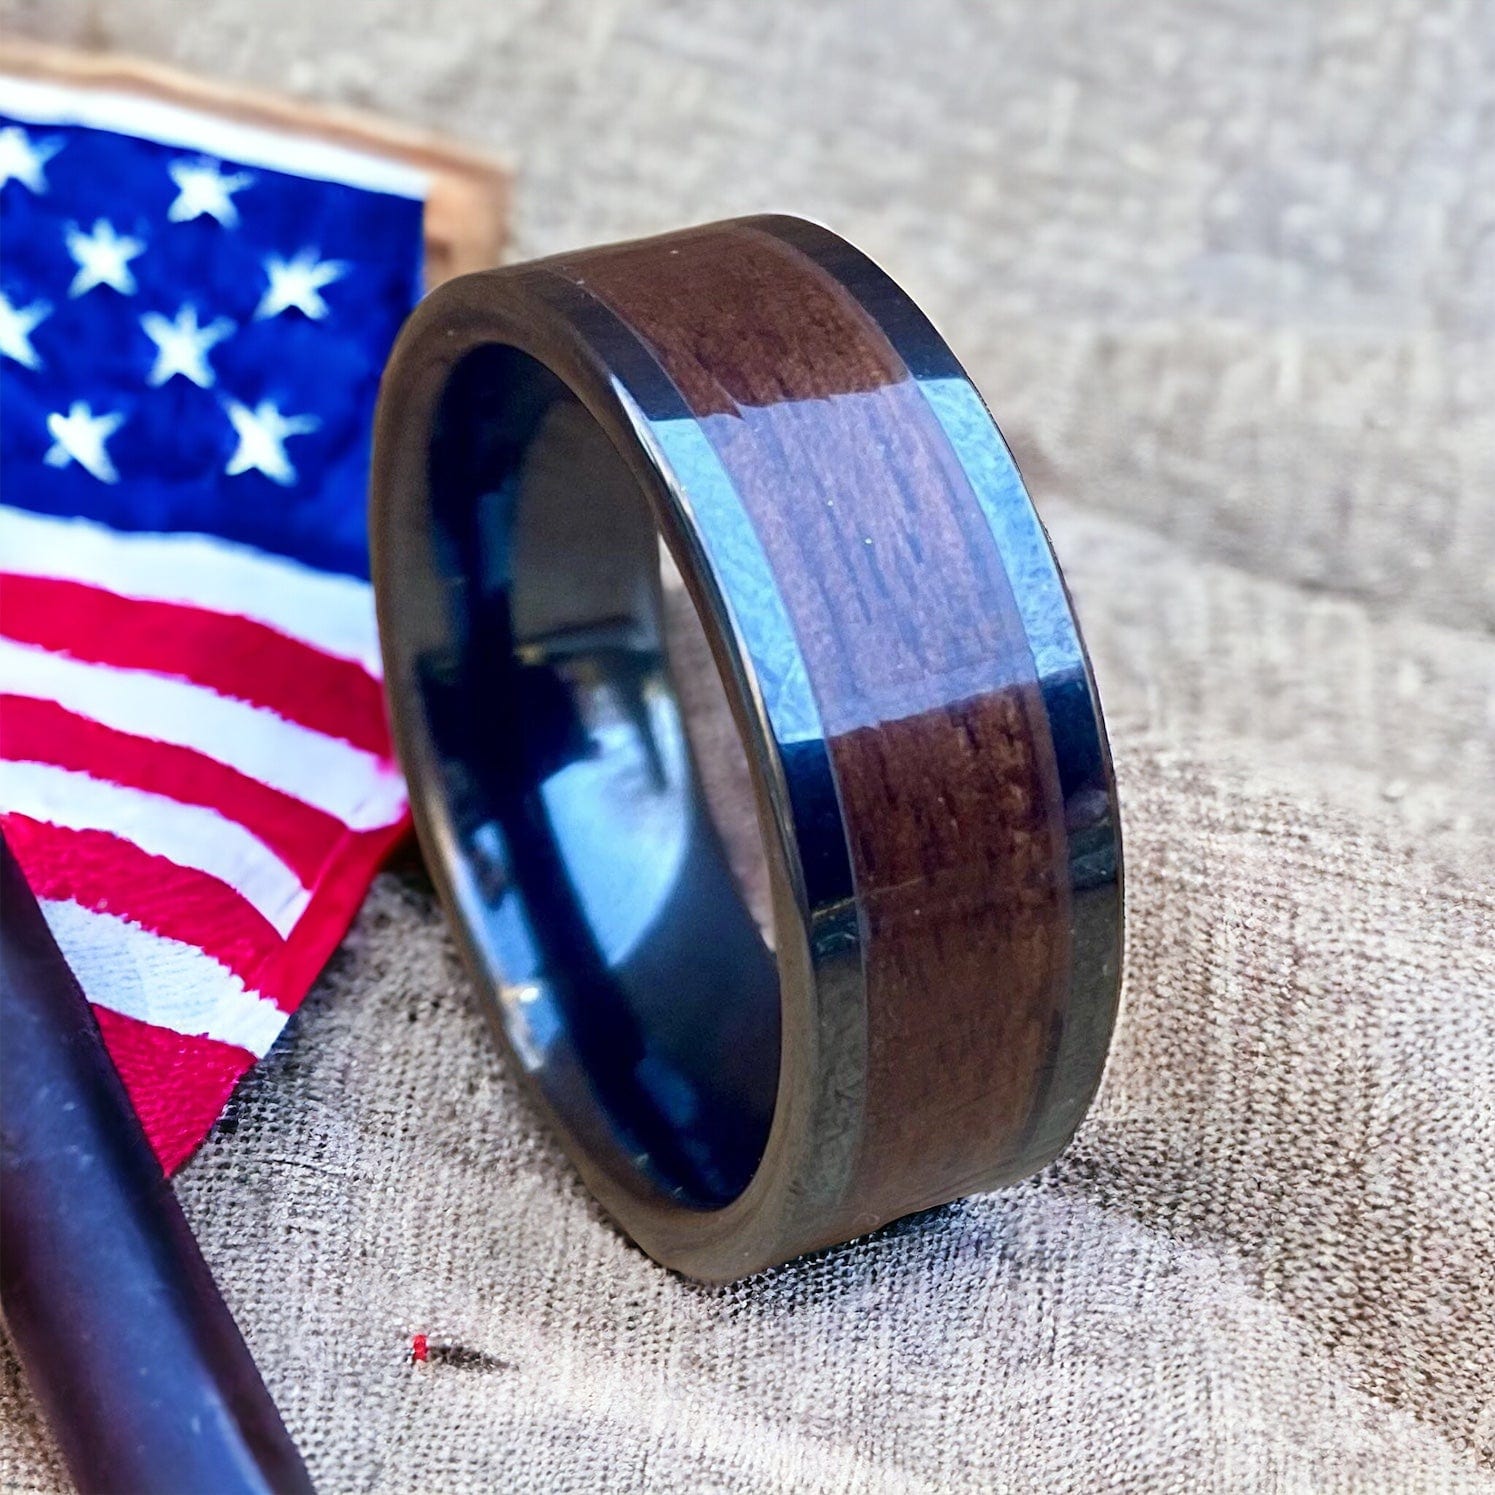 BW James Jewelers ALT Wedding Band “The Sergeant” 100% USA Made Black Ceramic Ring With Wood From A M1 Garand